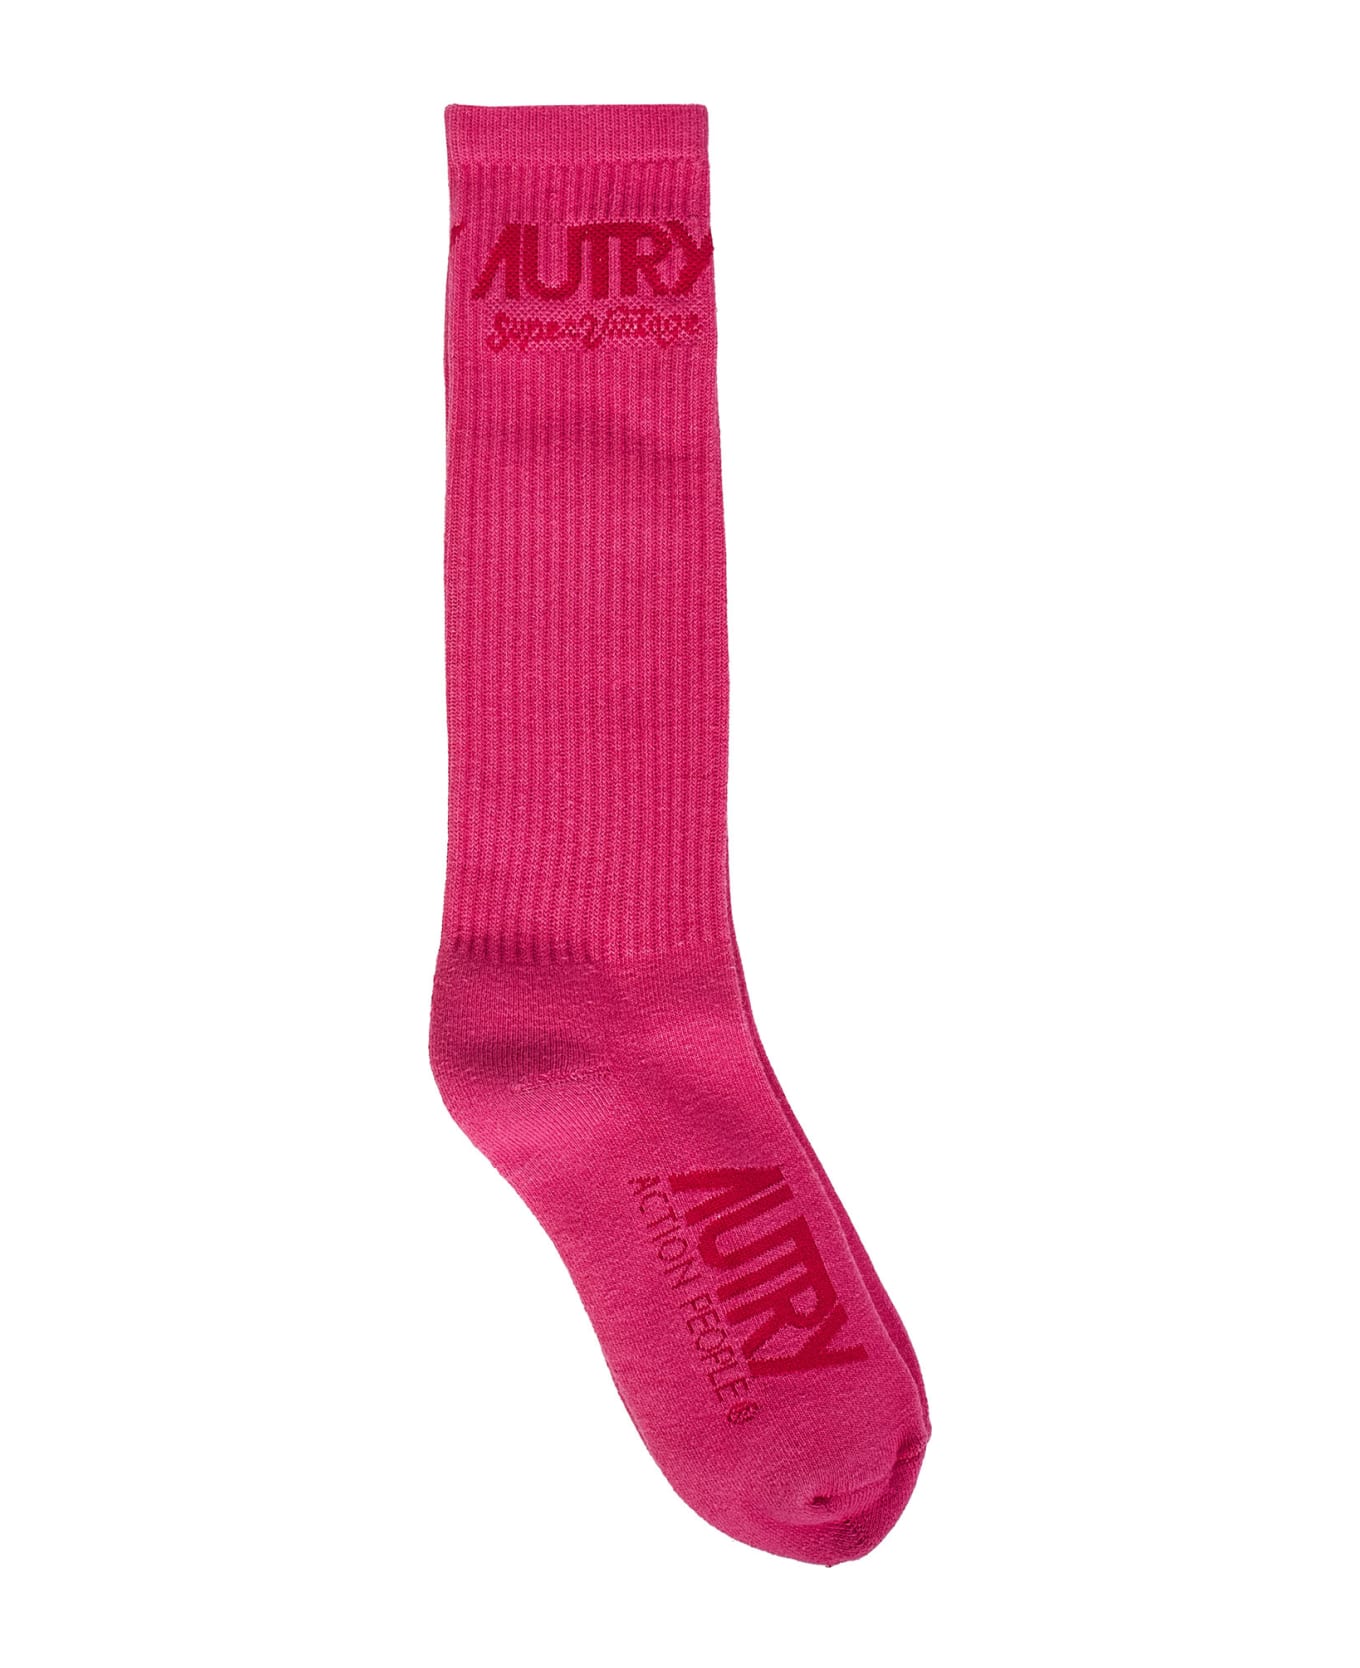 Autry Supervintage Socks - Tinto Pink 靴下